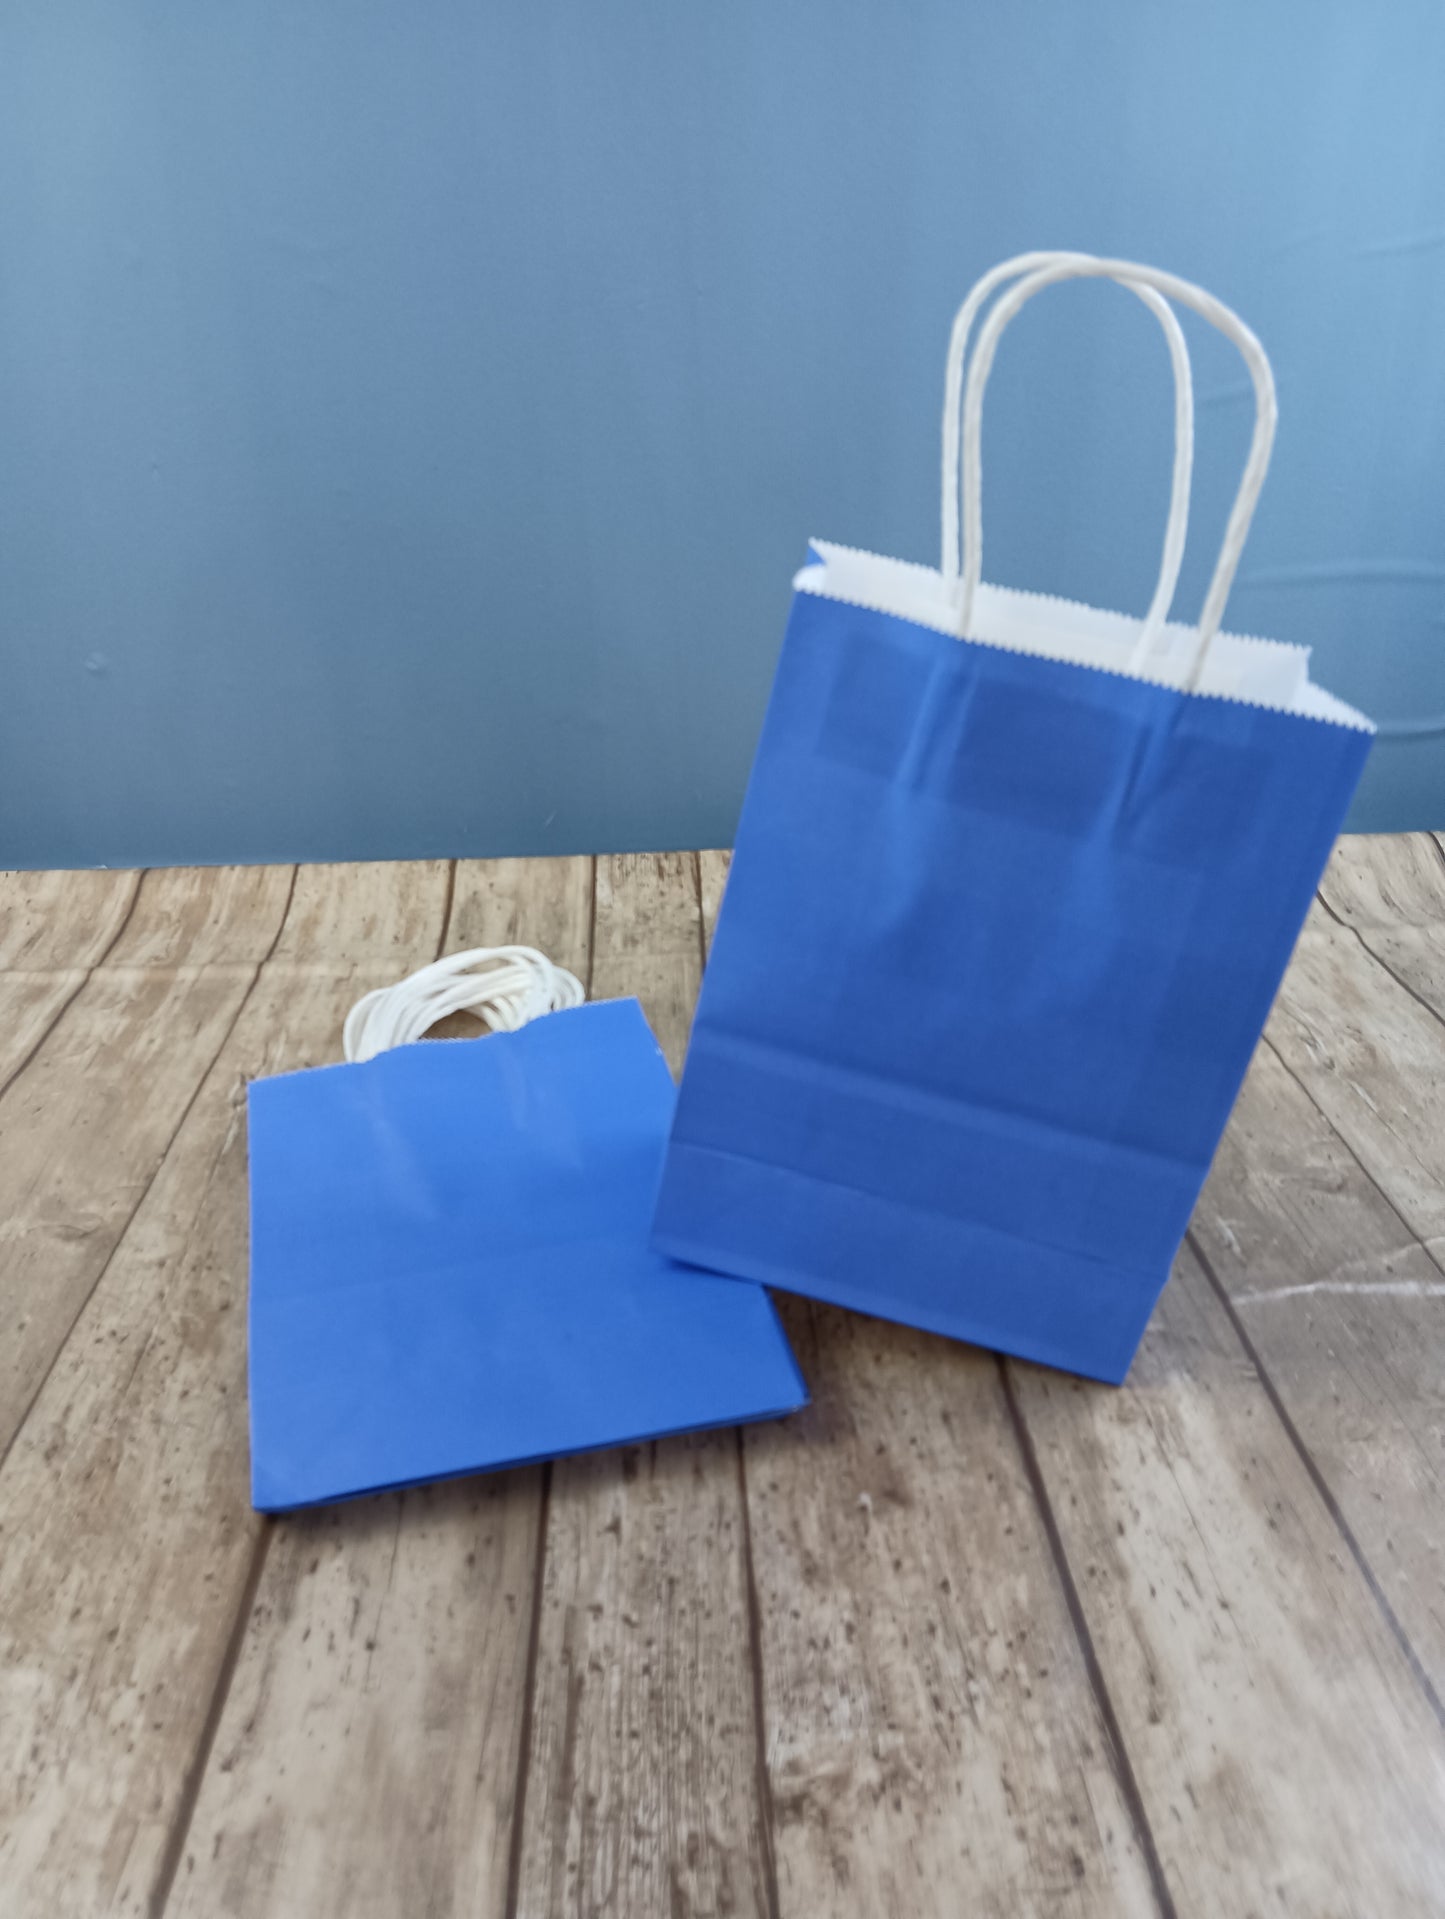 AJHMGJGO Souvenir Bags, Blue Color, Eco-Friendly Kraft Paper Material, 15x21cm Size, Set of 10, Simple and Elegant Design with Strong Load-Bearing Capacity